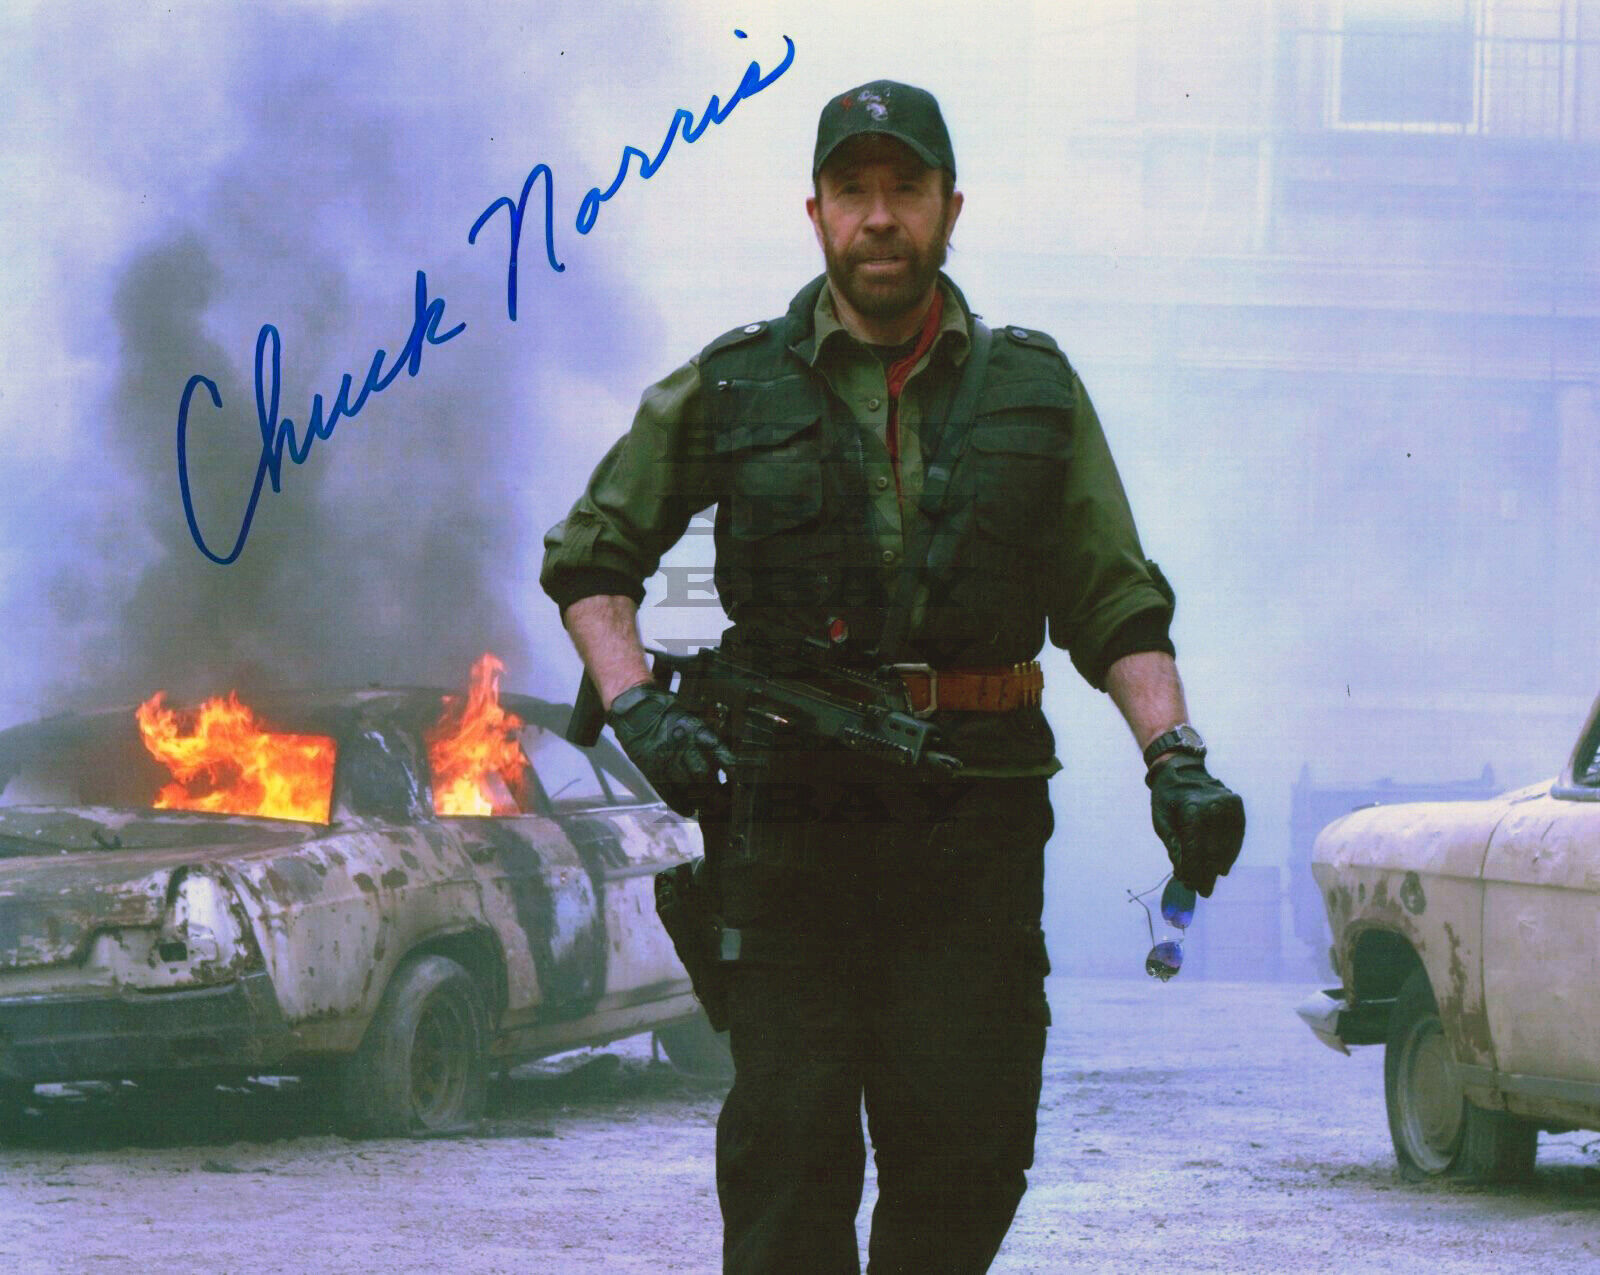 Chuck Norris The Expendables Signed 8x10 Photo Poster painting Reprint